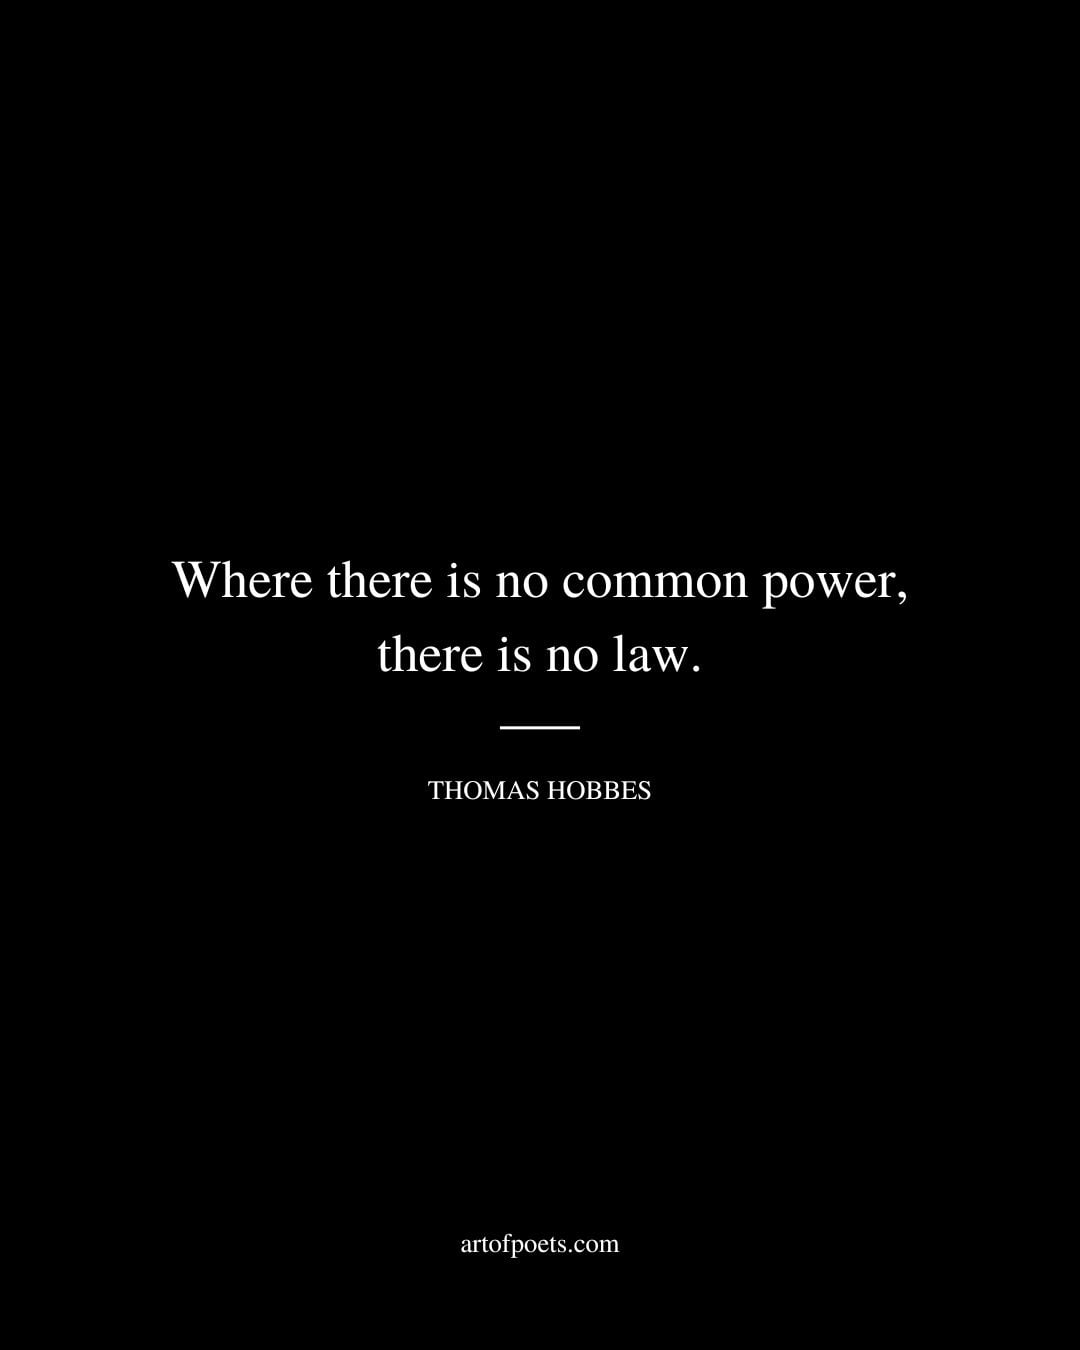 Where there is no common power there is no law